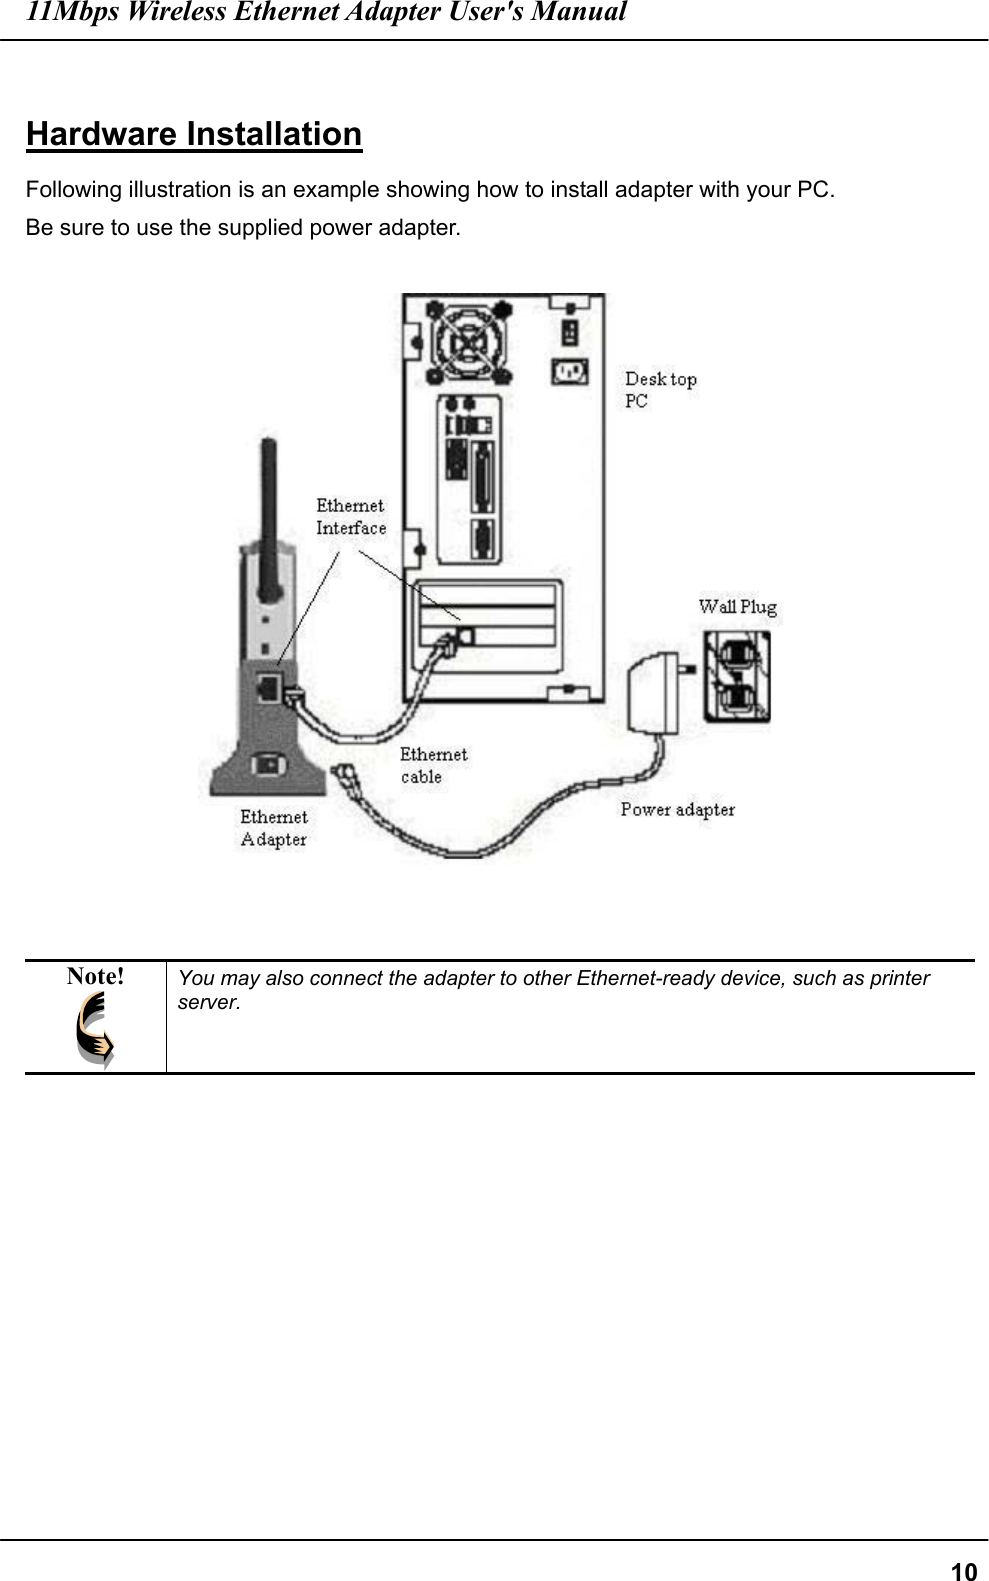 11Mbps Wireless Ethernet Adapter User&apos;s Manual  10 Hardware Installation Following illustration is an example showing how to install adapter with your PC. Be sure to use the supplied power adapter.     Note!  You may also connect the adapter to other Ethernet-ready device, such as printer server.   